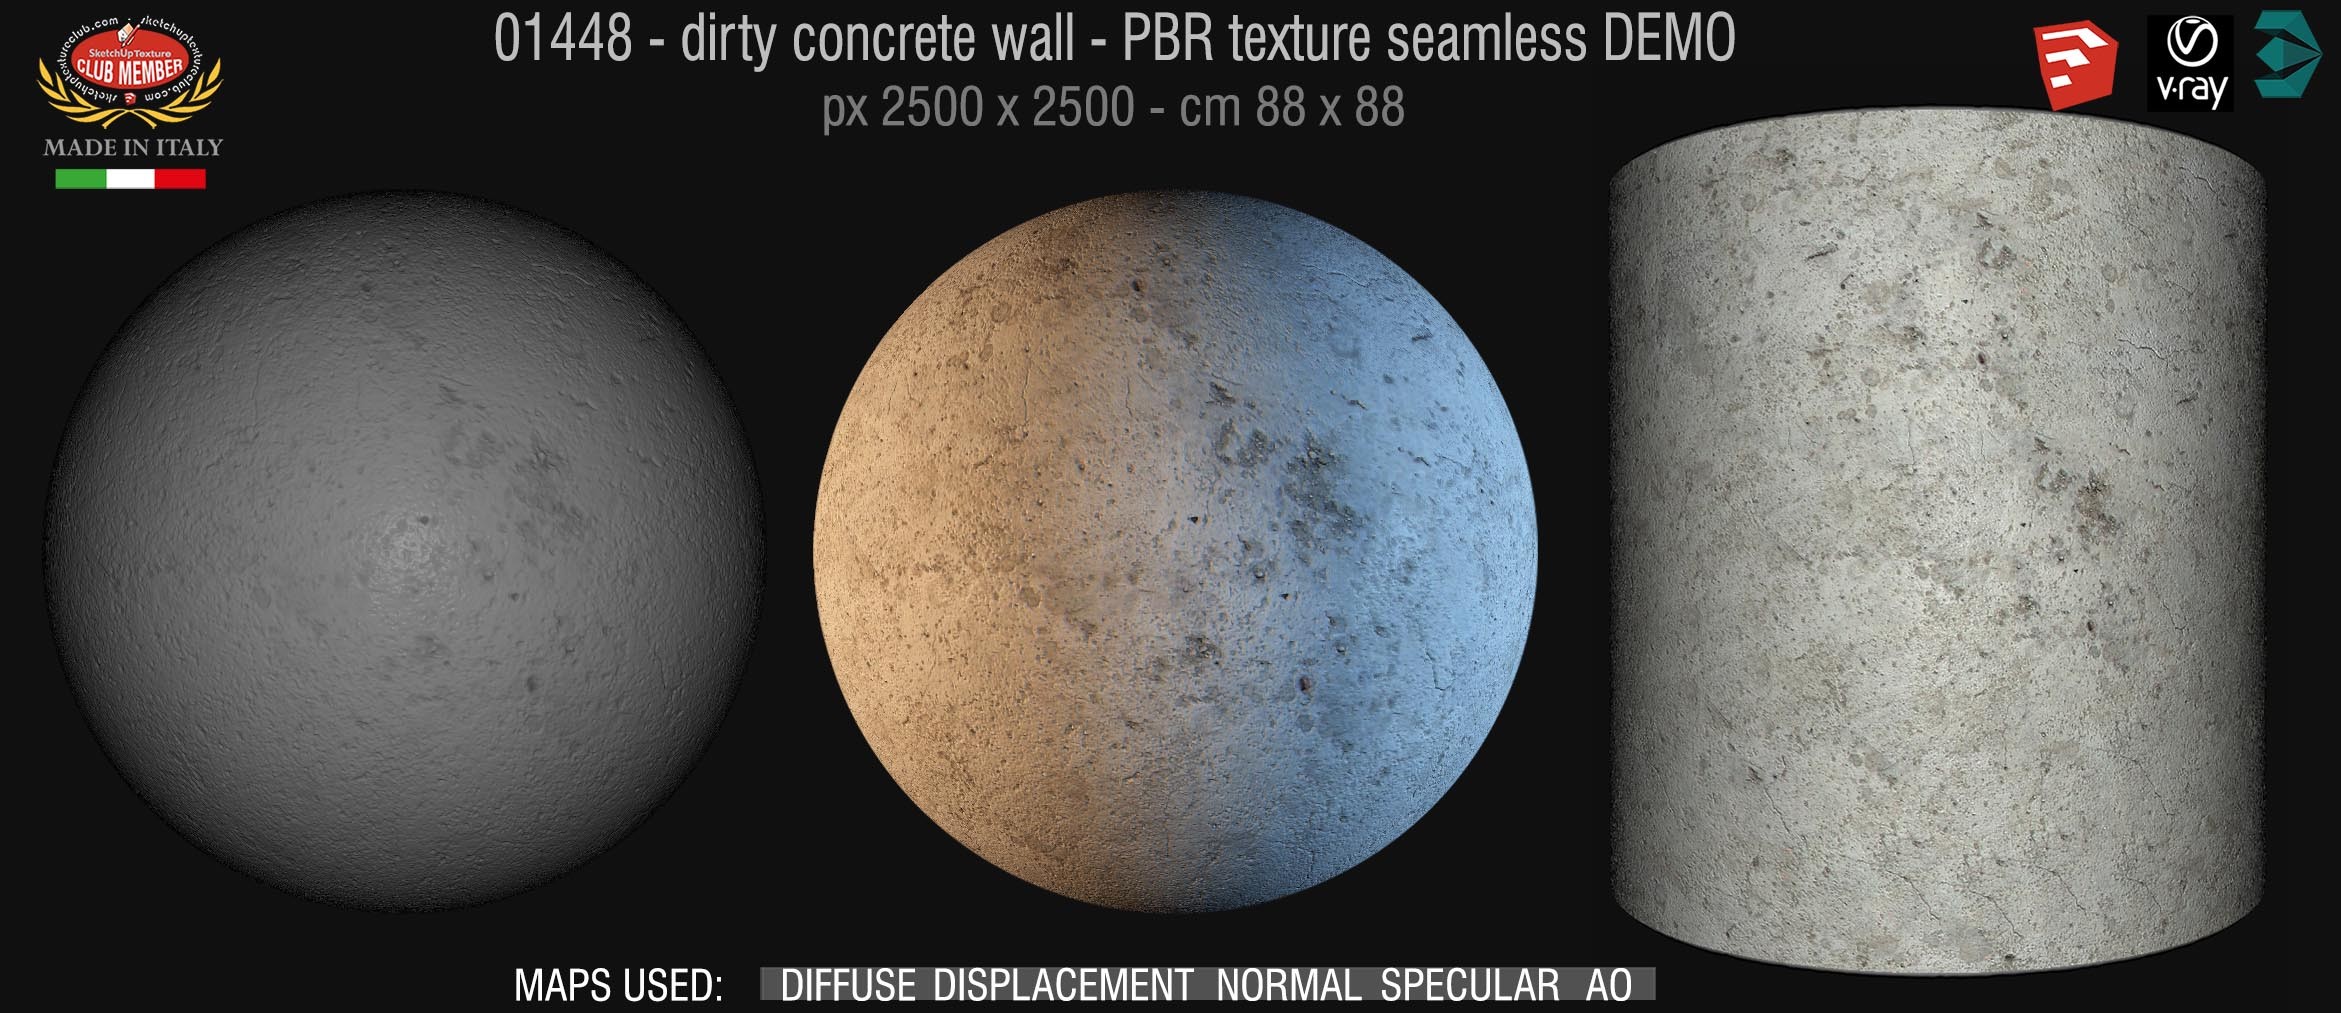 01448 Concrete bare dirty wall PBR texture seamless DEMO